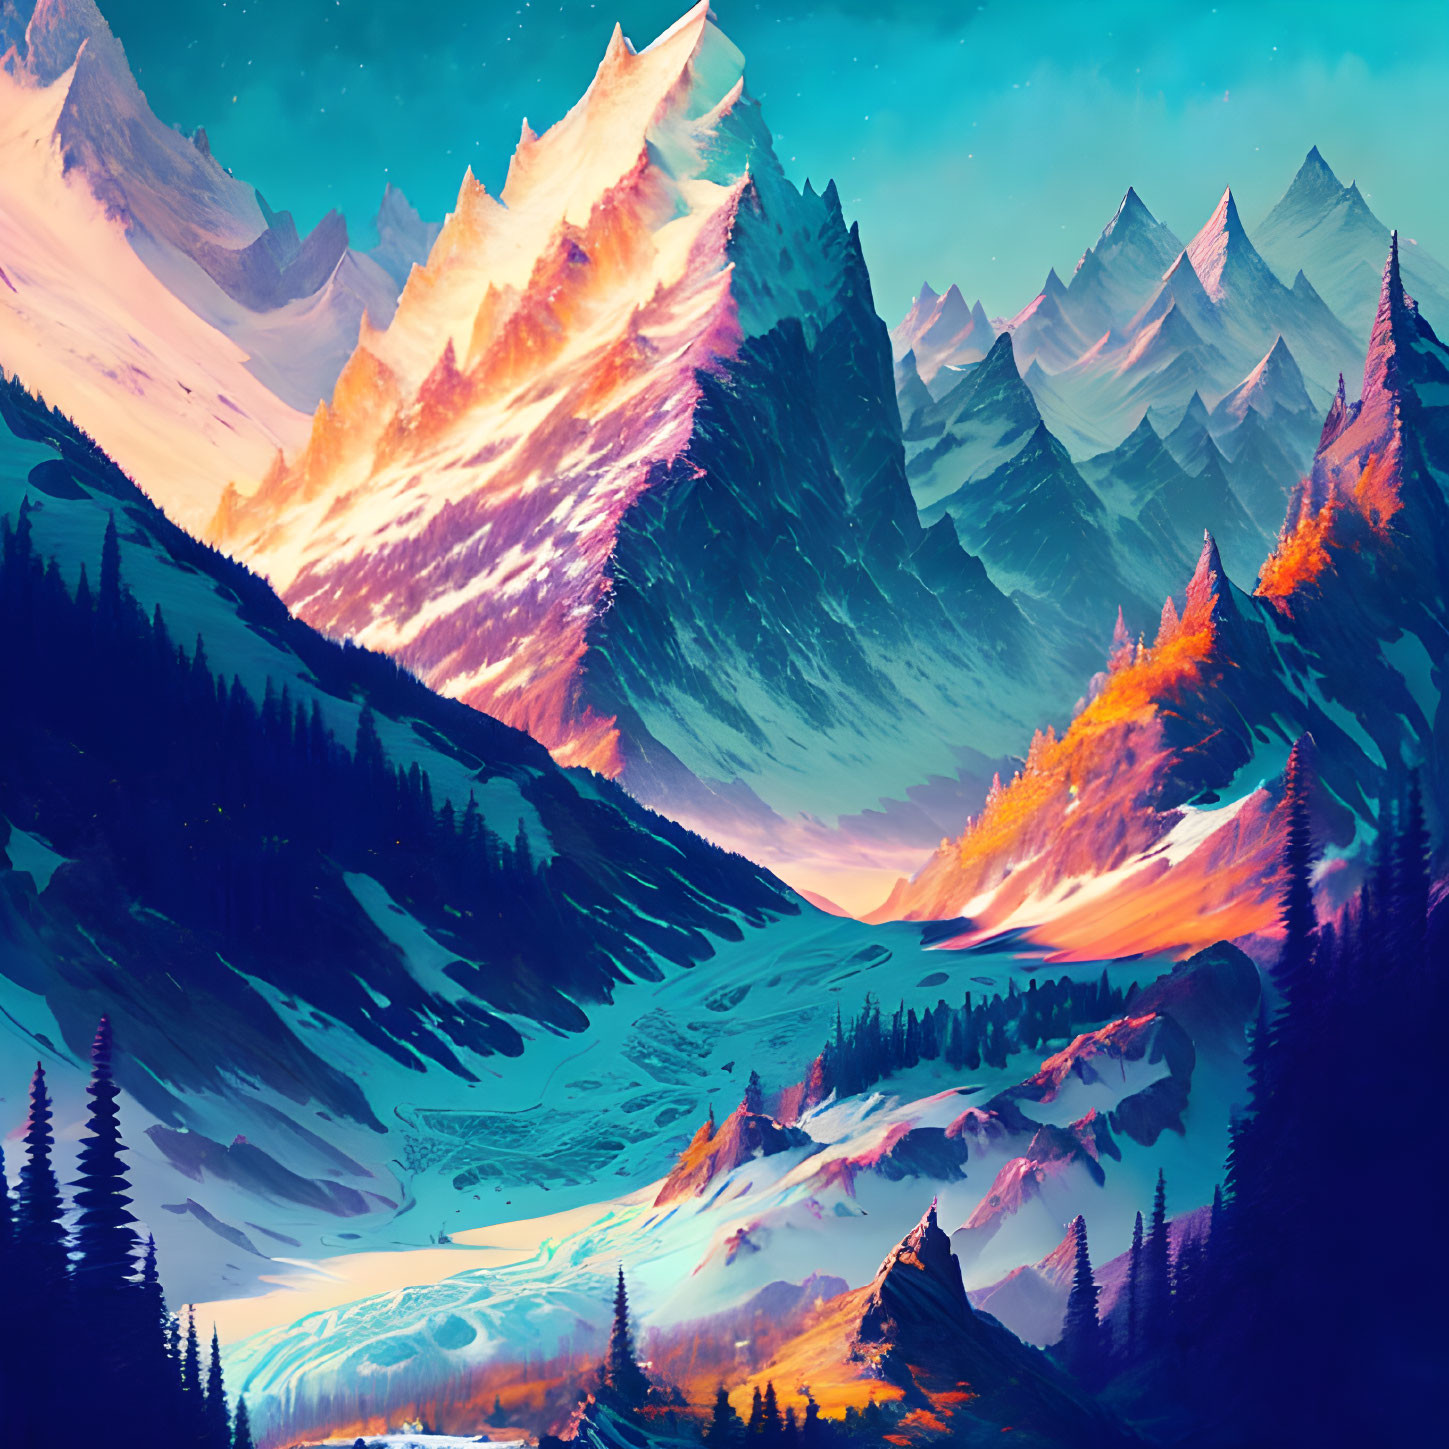 Vibrant sunset mountain landscape with river in blue, orange, and pink